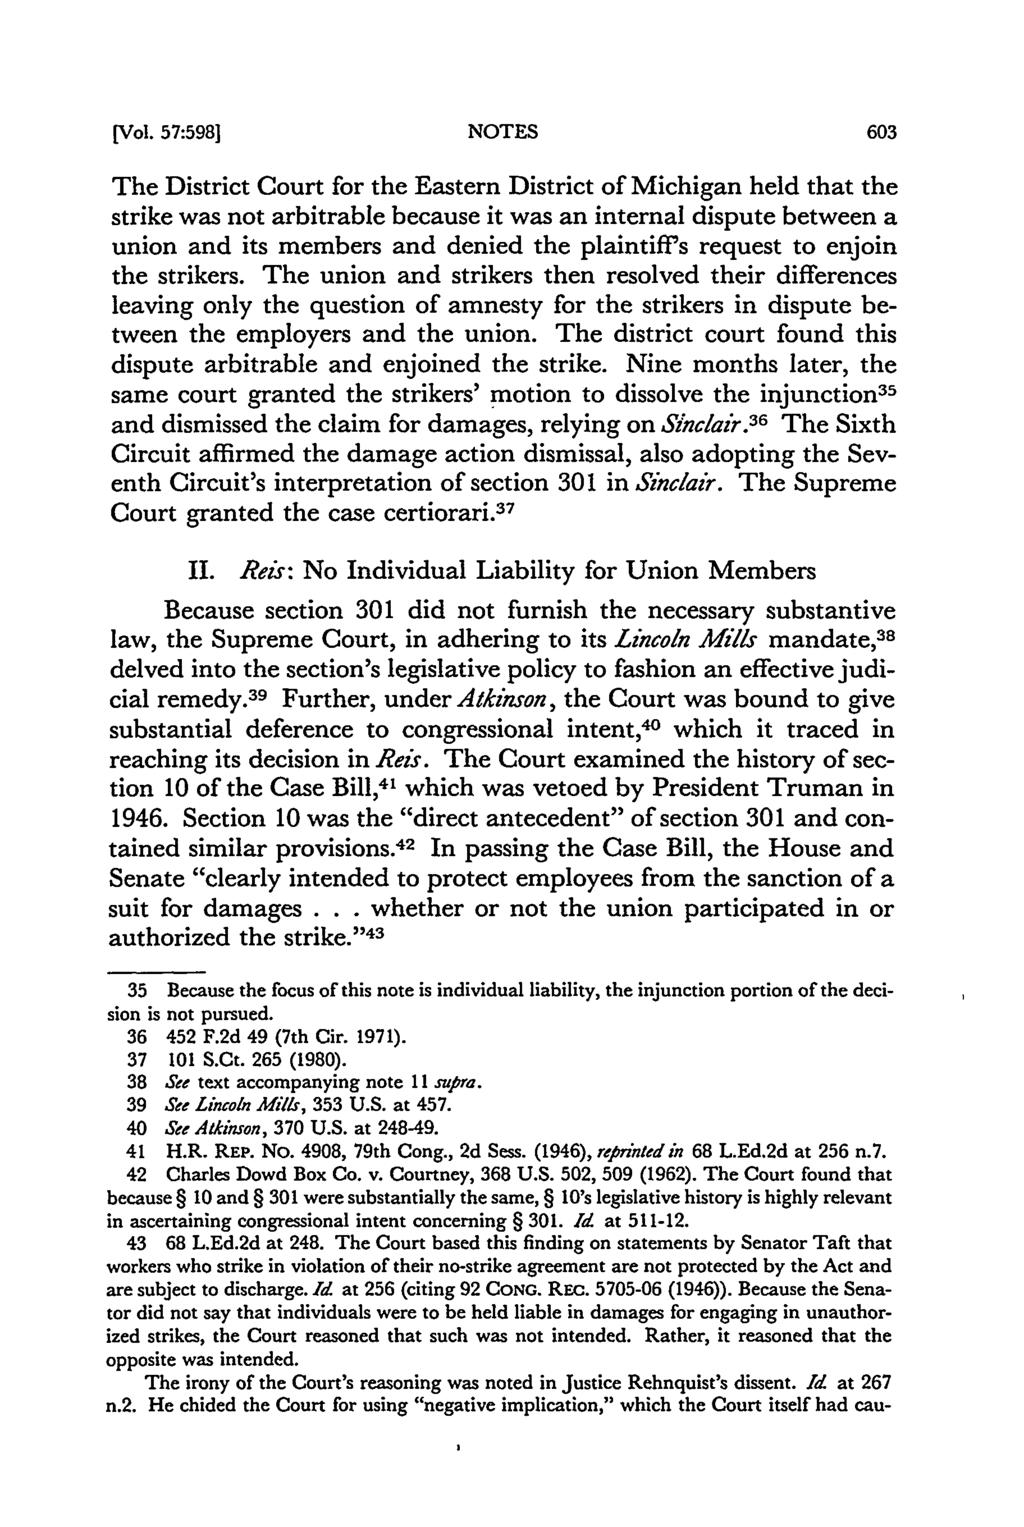 [Vol. 57:598] NOTES The District Court for the Eastern District of Michigan held that the strike was not arbitrable because it was an internal dispute between a union and its members and denied the